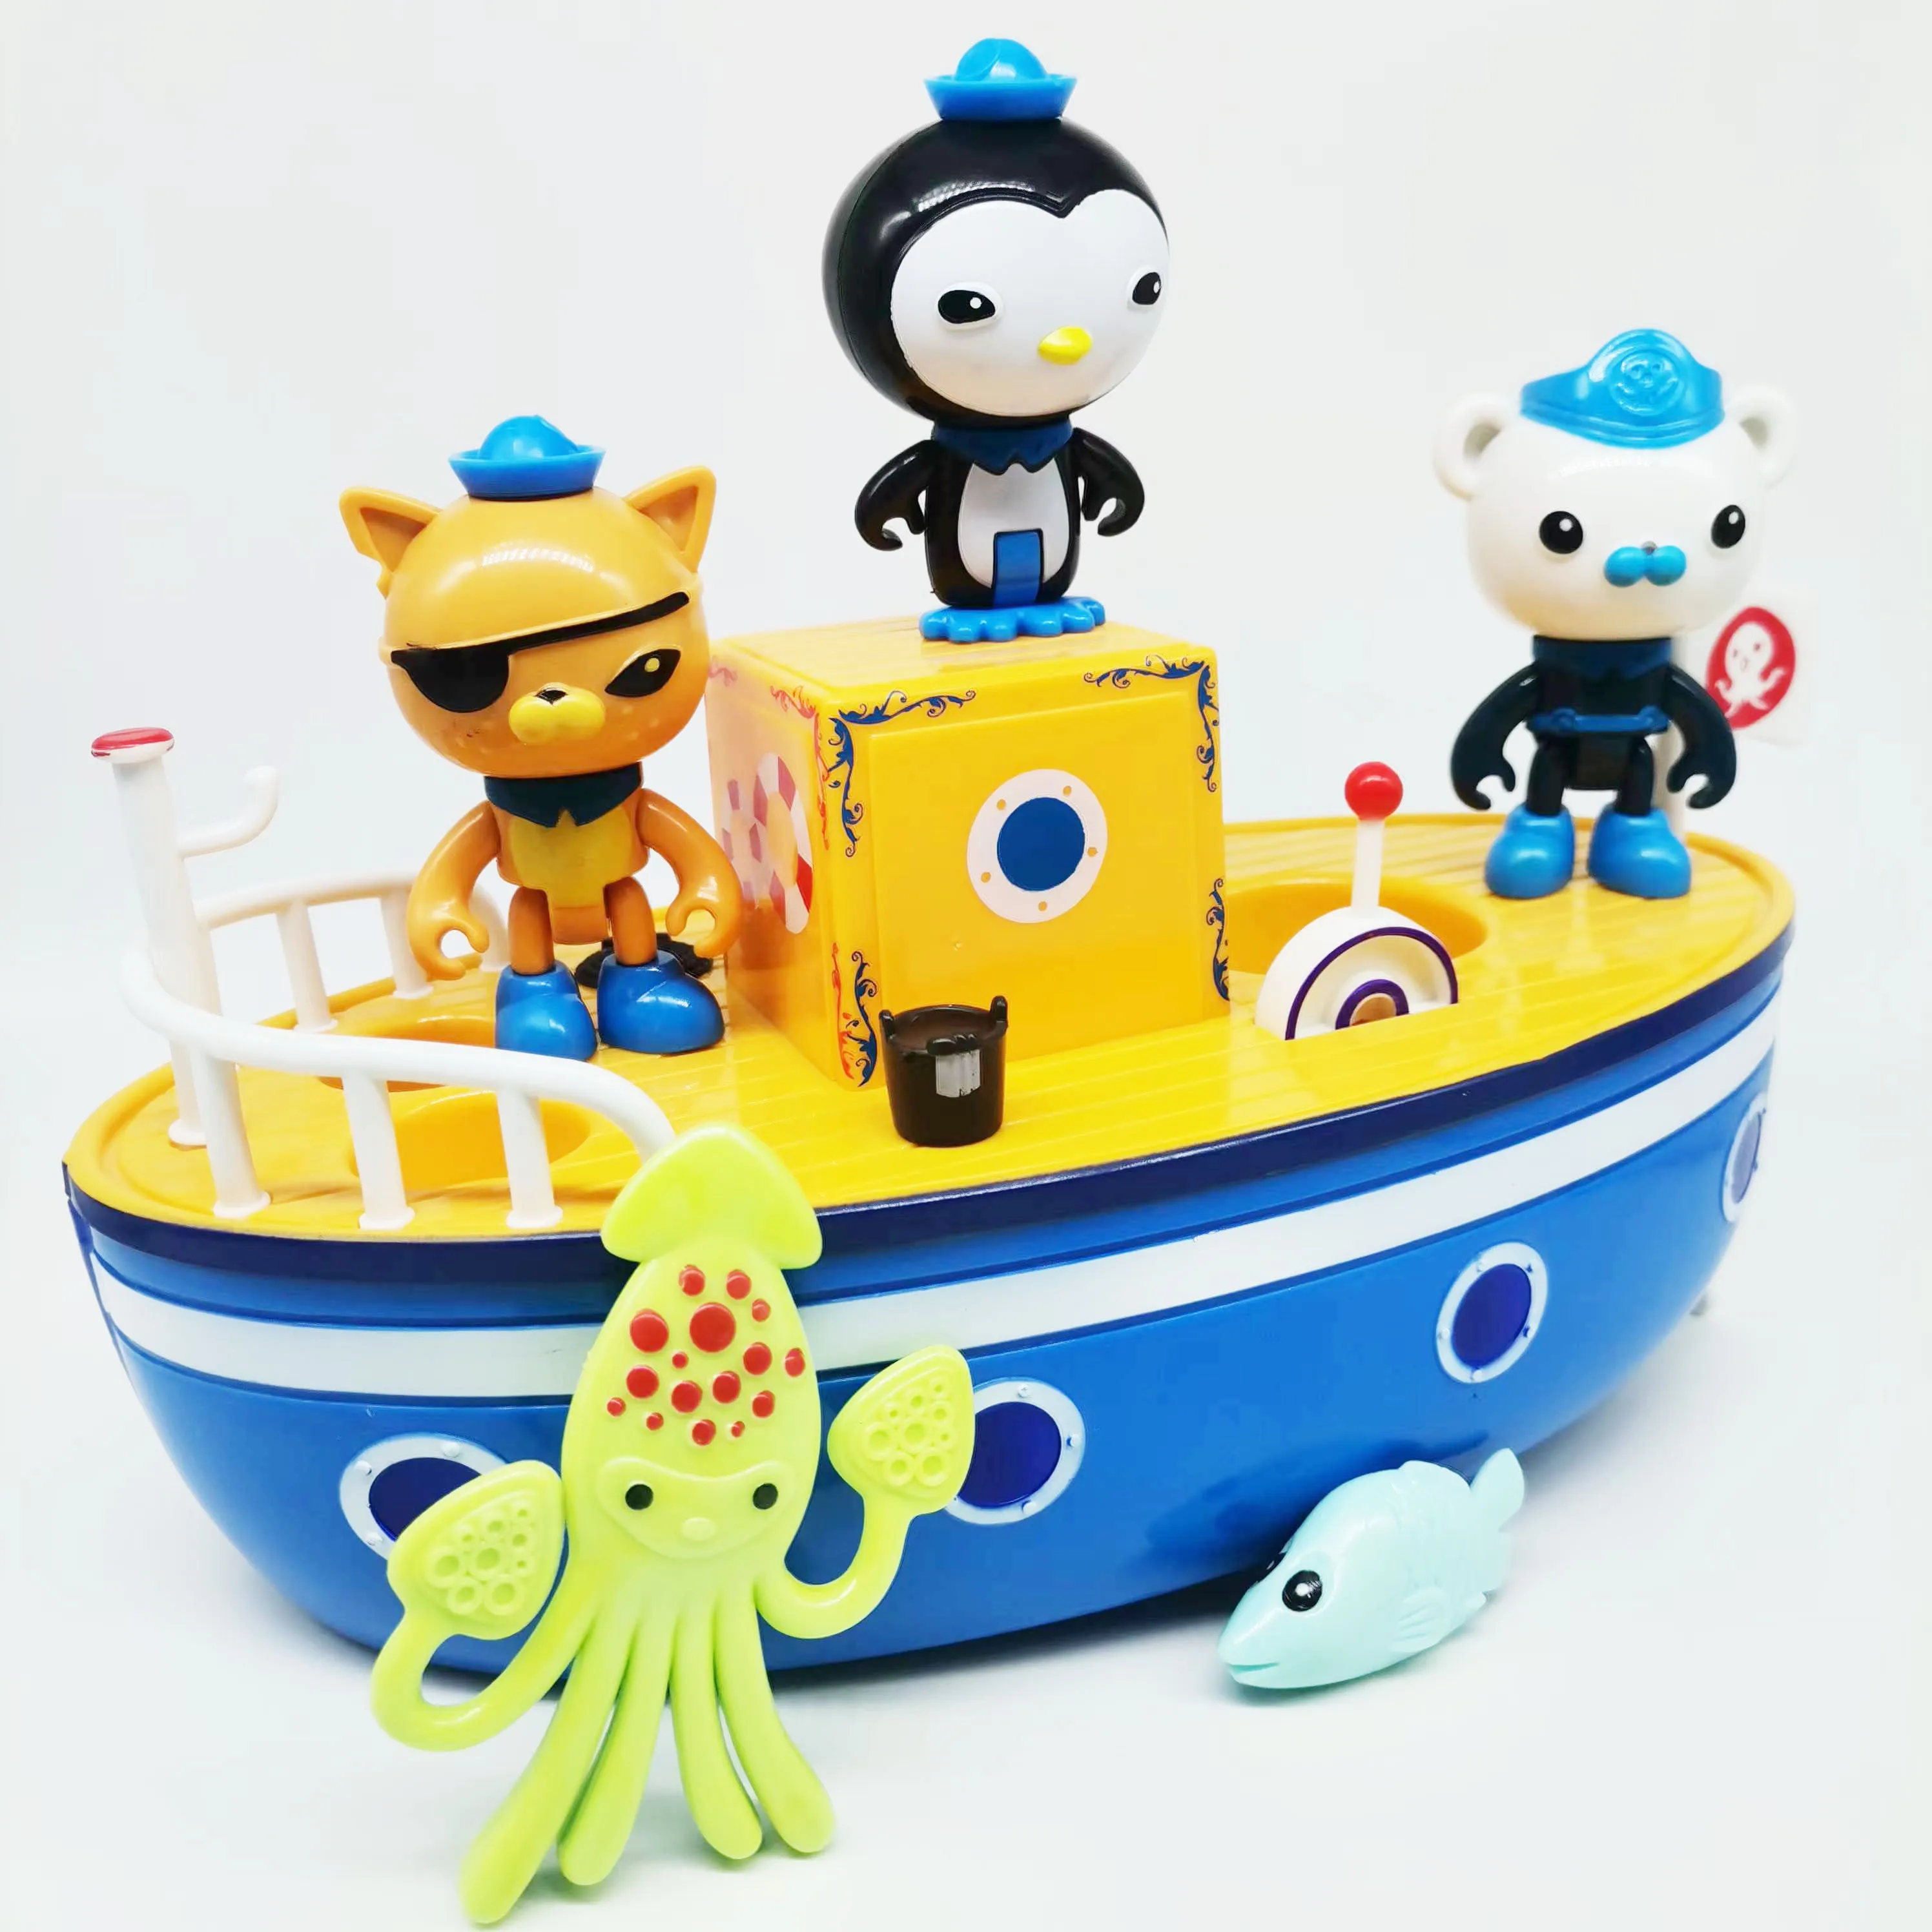 octonauts Action Figures bath toys Kwazii Barnacles Peso GUP Bath Boat Toy Float On The Water Toy for Kids